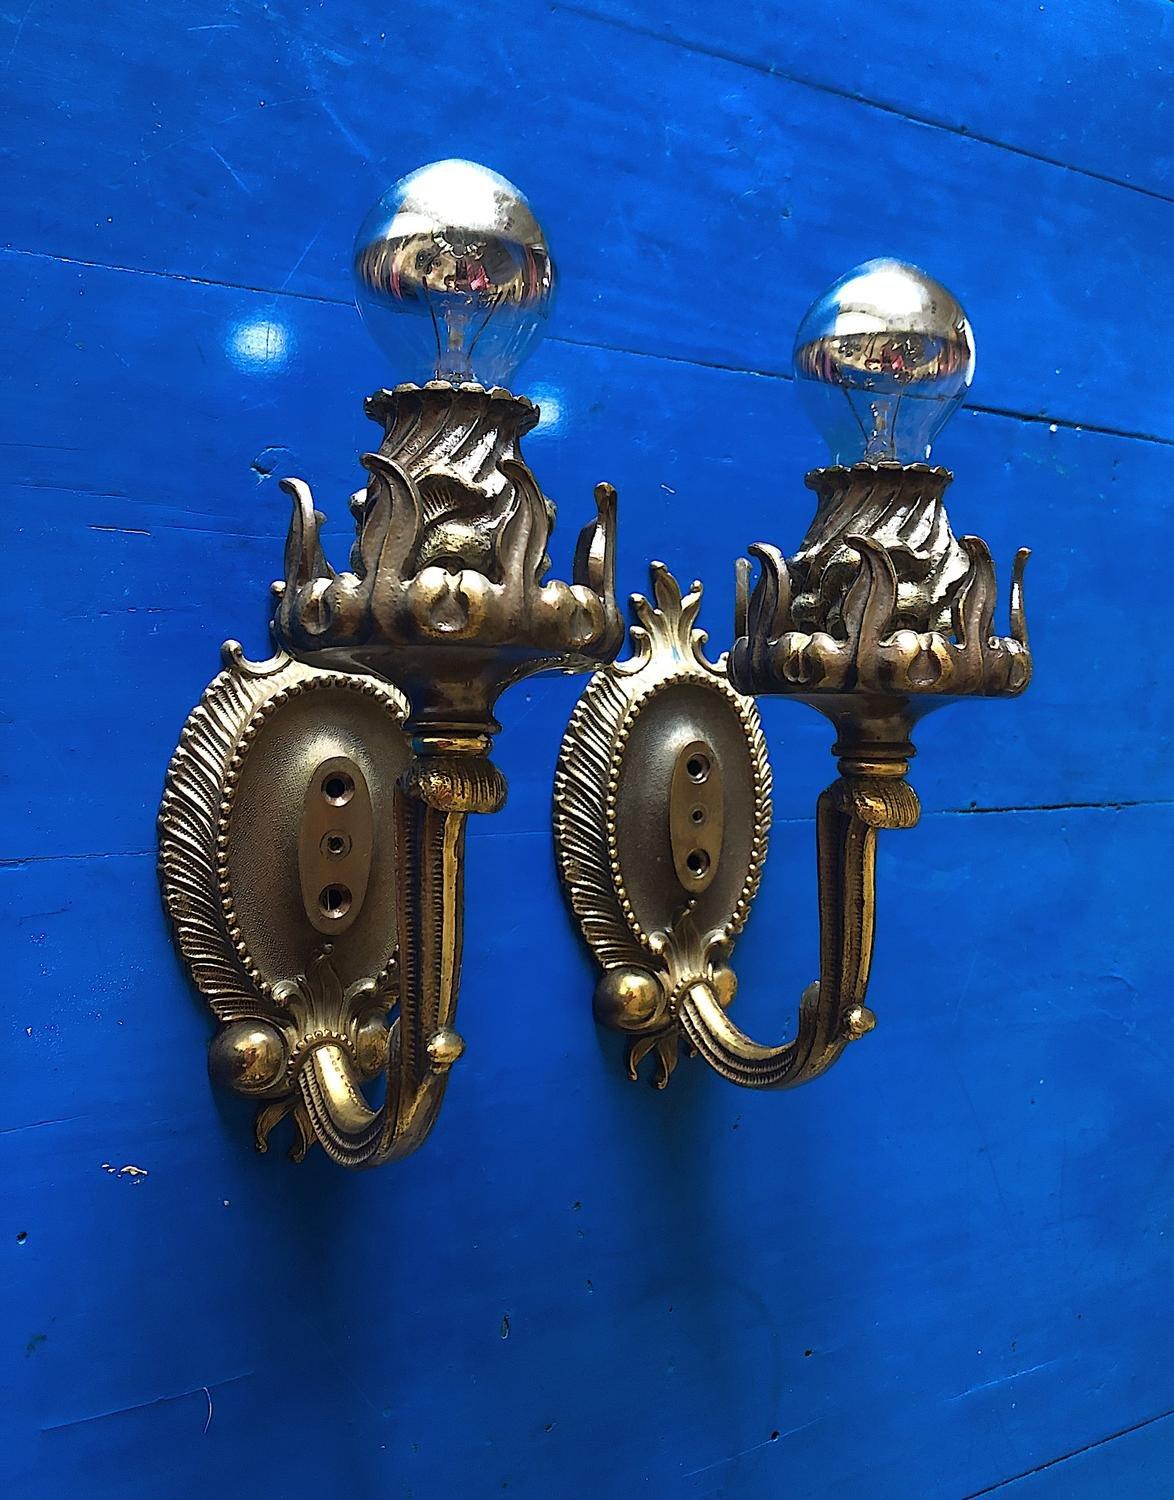 Pair of Italian wall lights by Bruno Chiarini. Italy, late 1940s. Solid brass.
Excellent original conditions. Both lights are signed.

Creator: Bruno Chiarini
Dimensions: Height: 20cm
Materials and Techniques: Brass
Place of Origin: